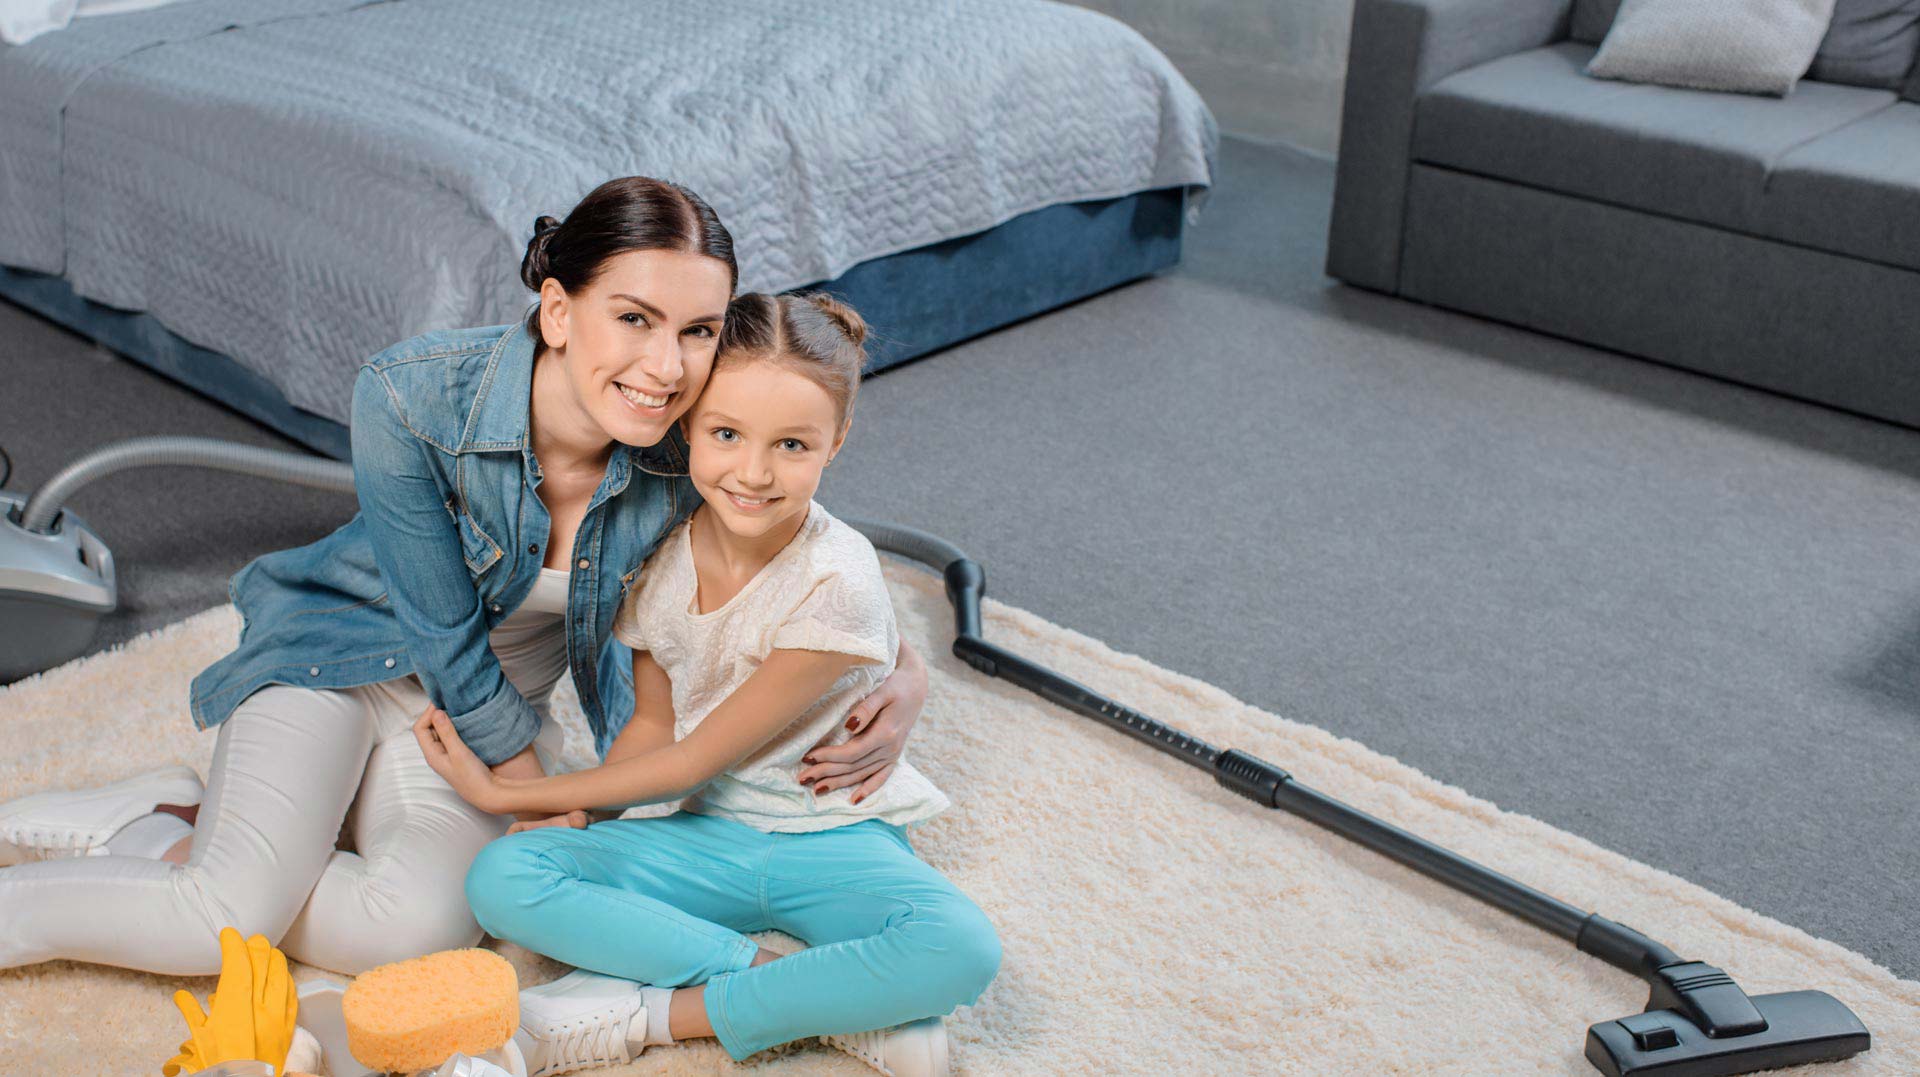 Carpet Clean Team: Mother and daughter smiling at the camera while sitting on a carpeted floor with cleaning supplies and a vacuum cleaner, in a tidy room.